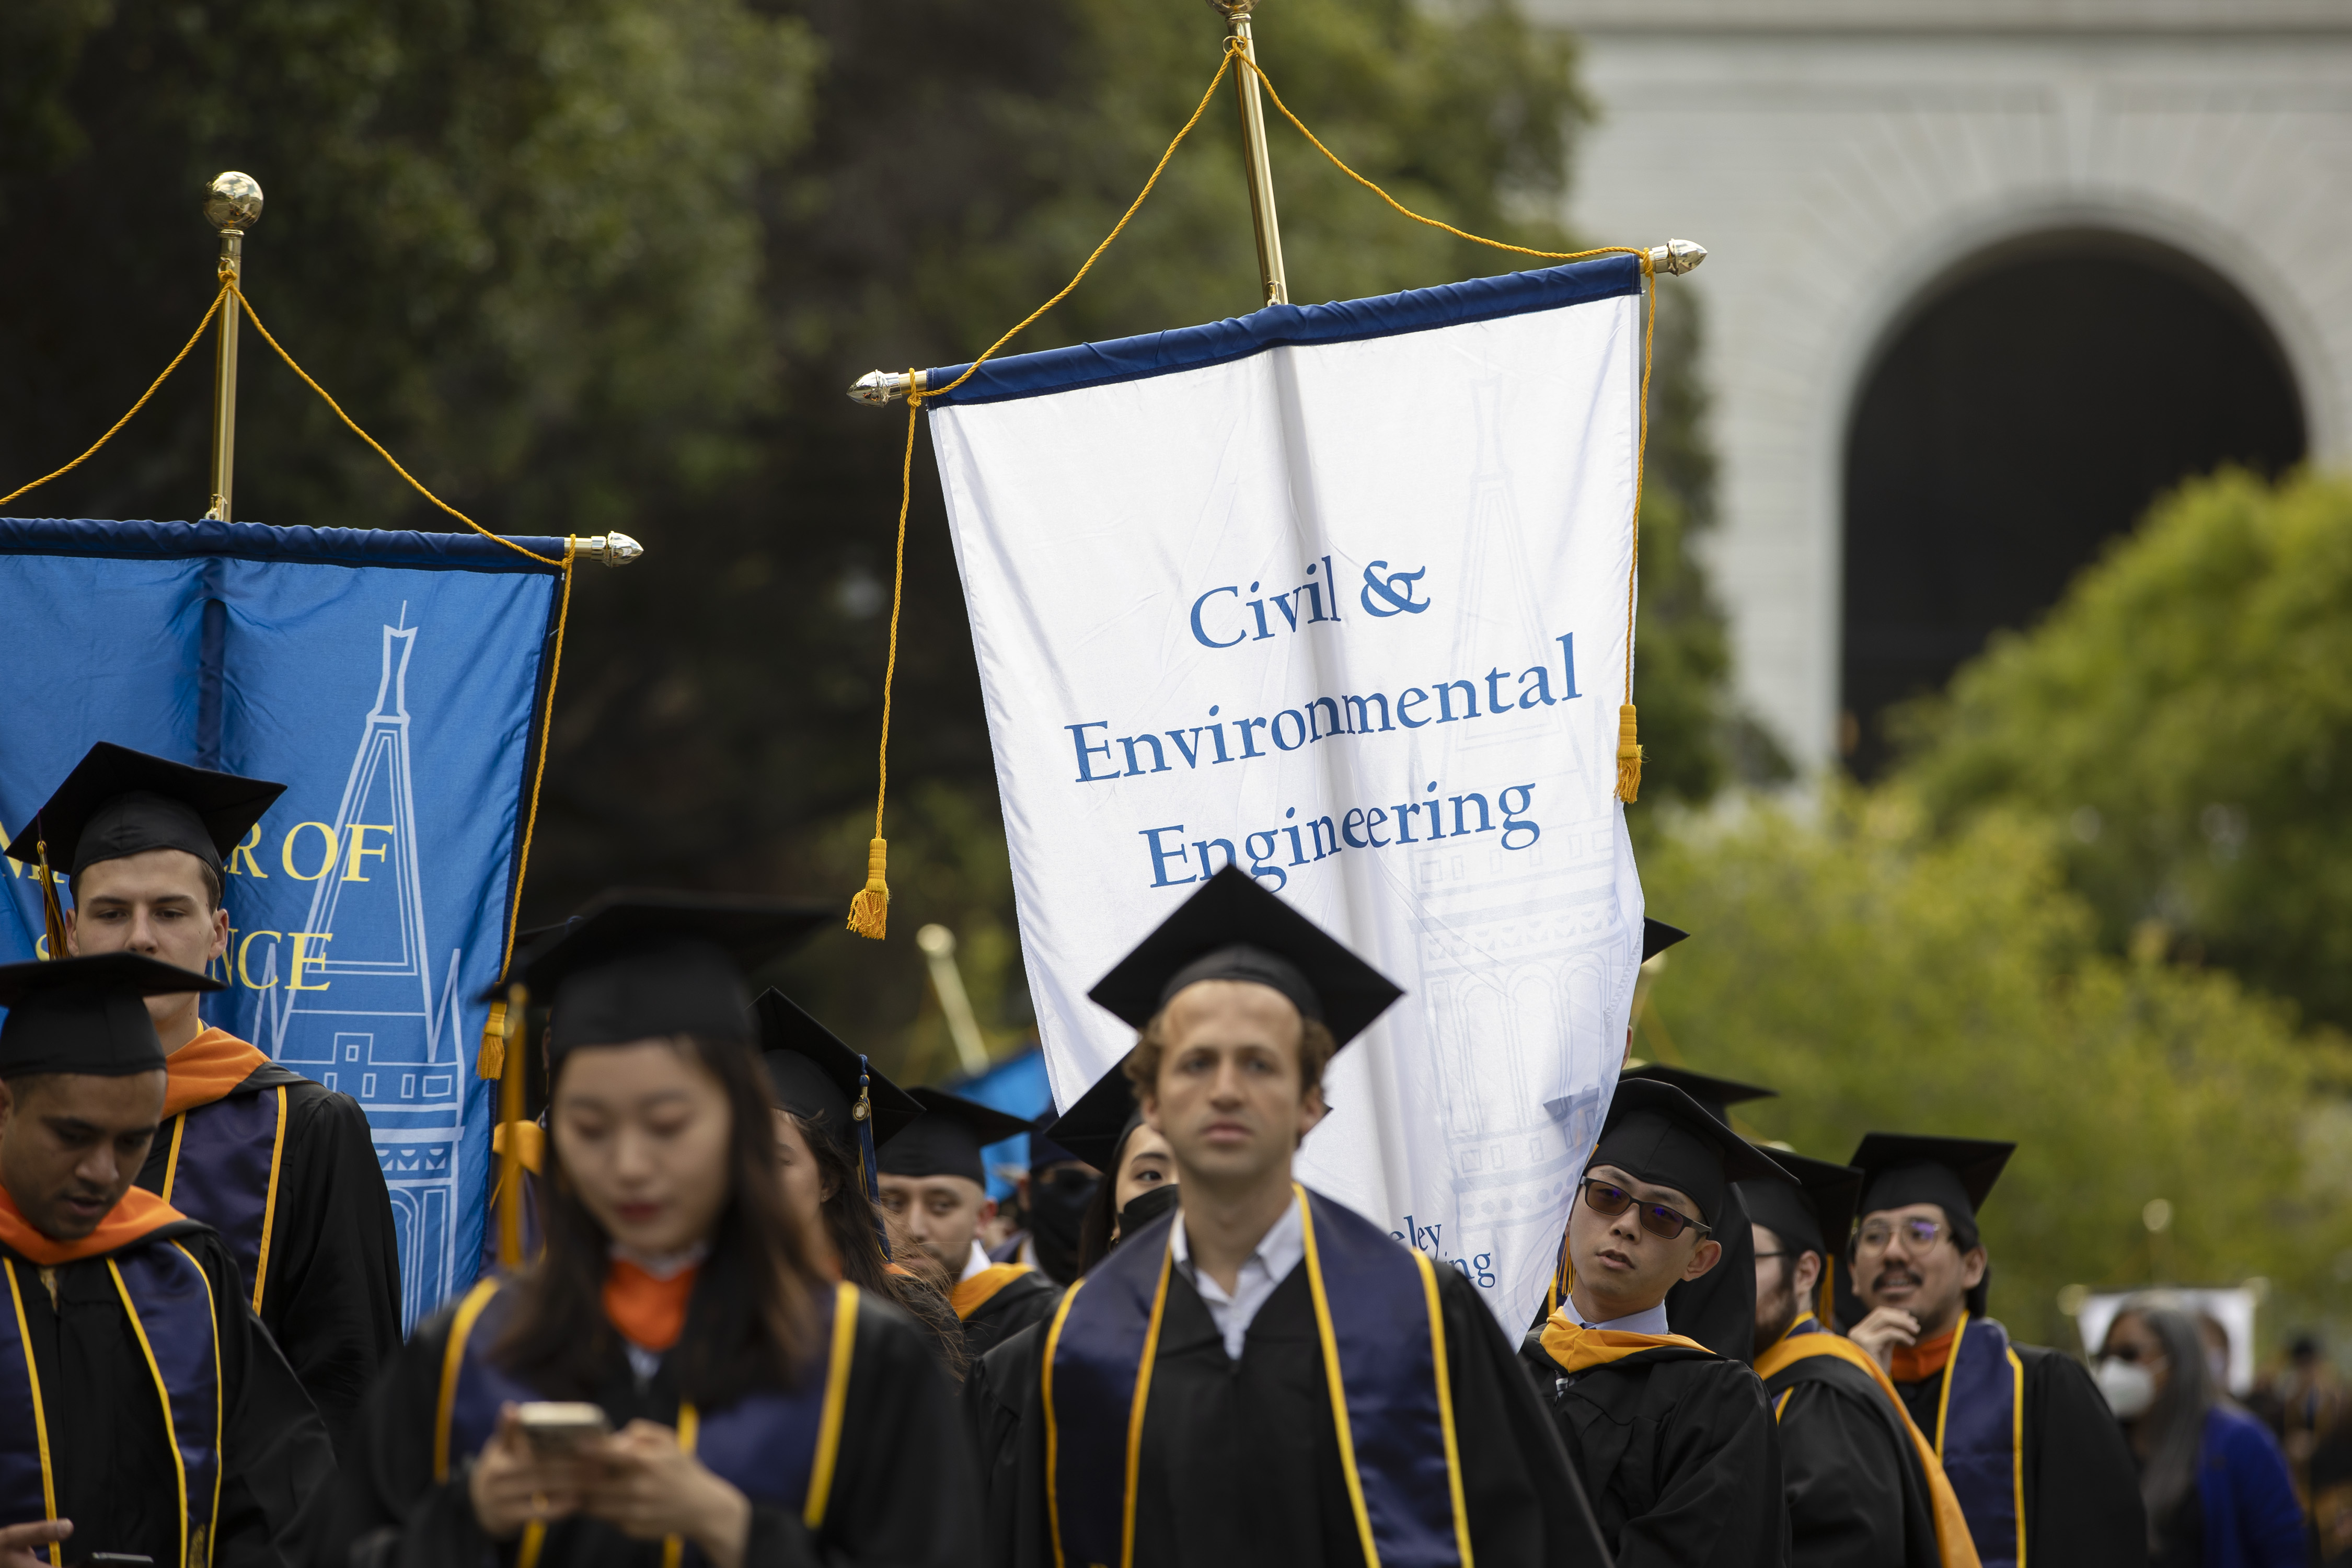 Undergraduate students holding the Civil & Environmental Engineering banner during baccalaureate commencement ceremony (Photo Credit: Brittany Hosea)